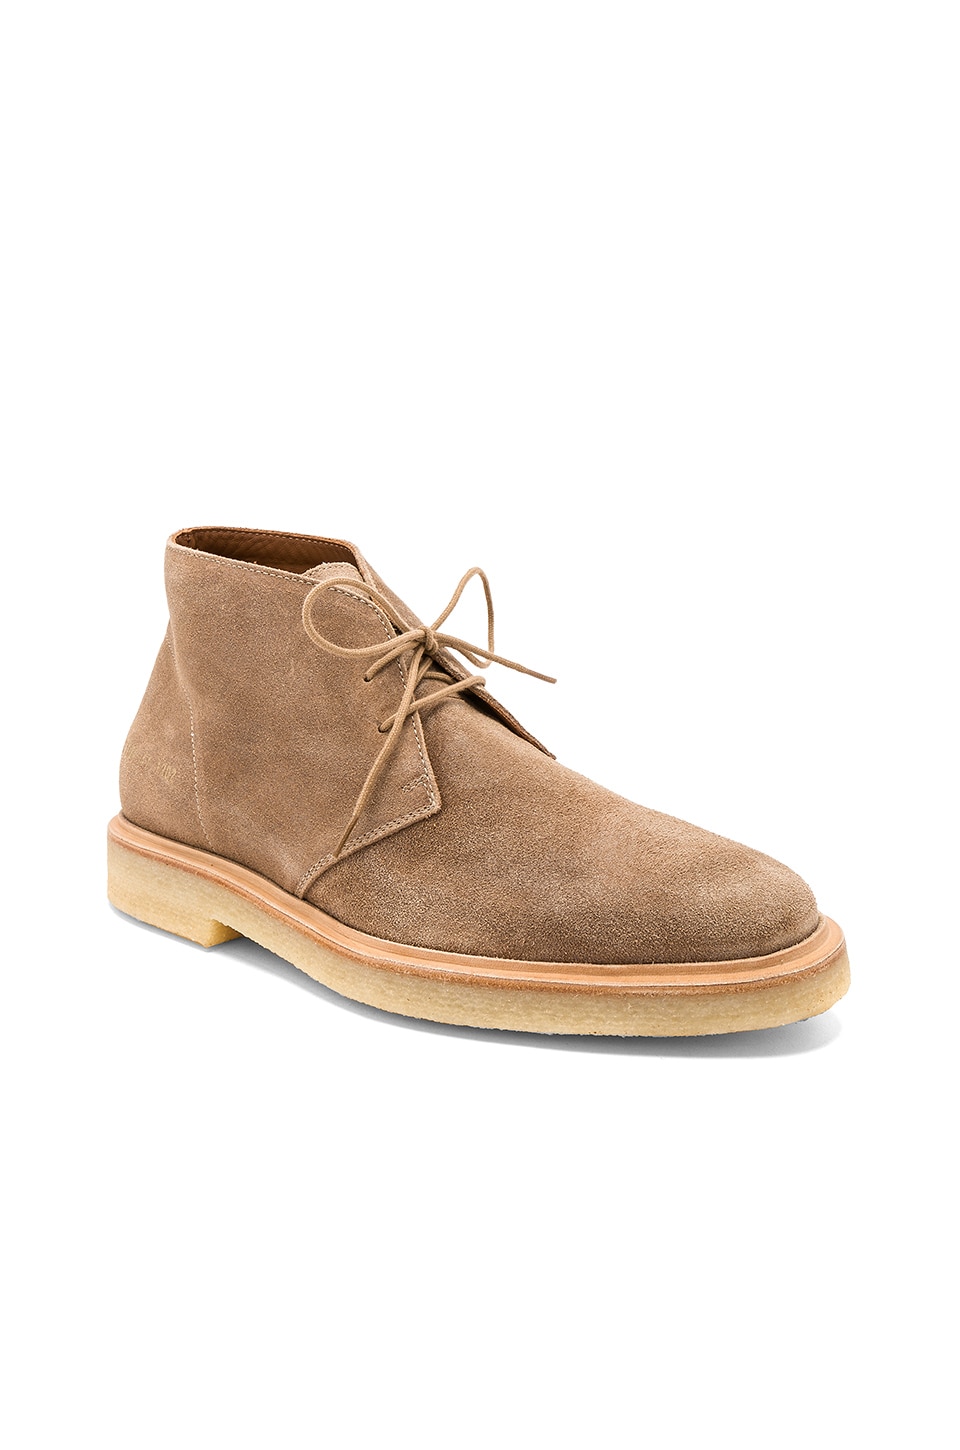 COMMON PROJECTS WAXED SUEDE CHUKKA, TAN | ModeSens